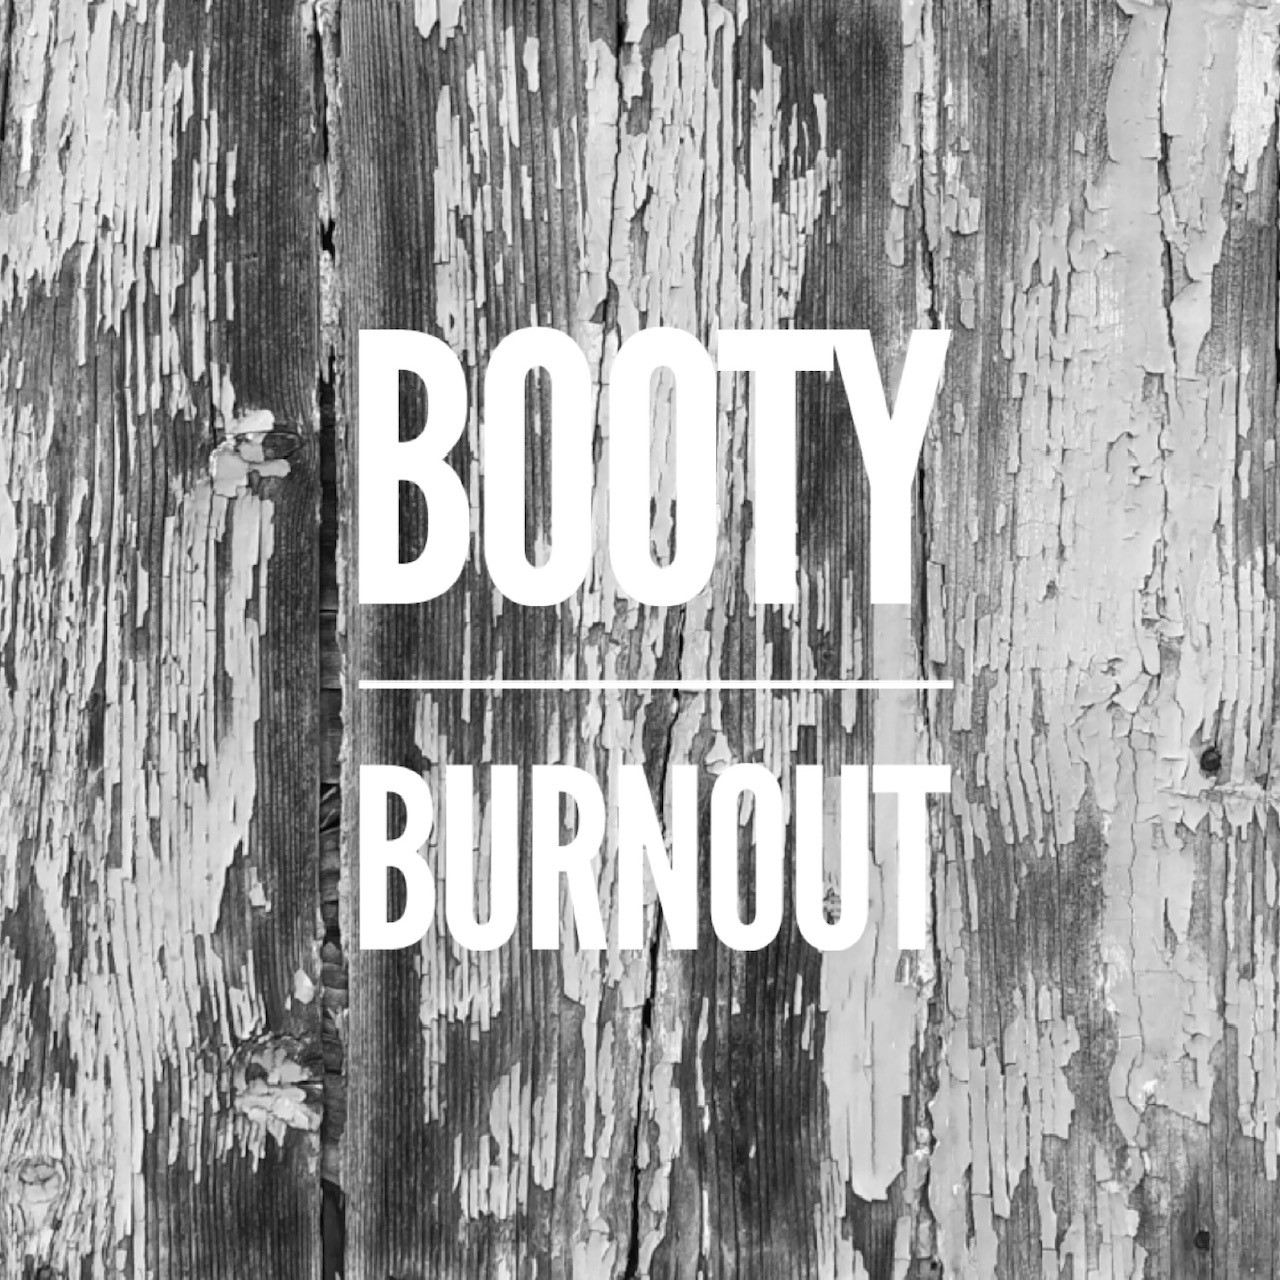 BOOTY burnout…